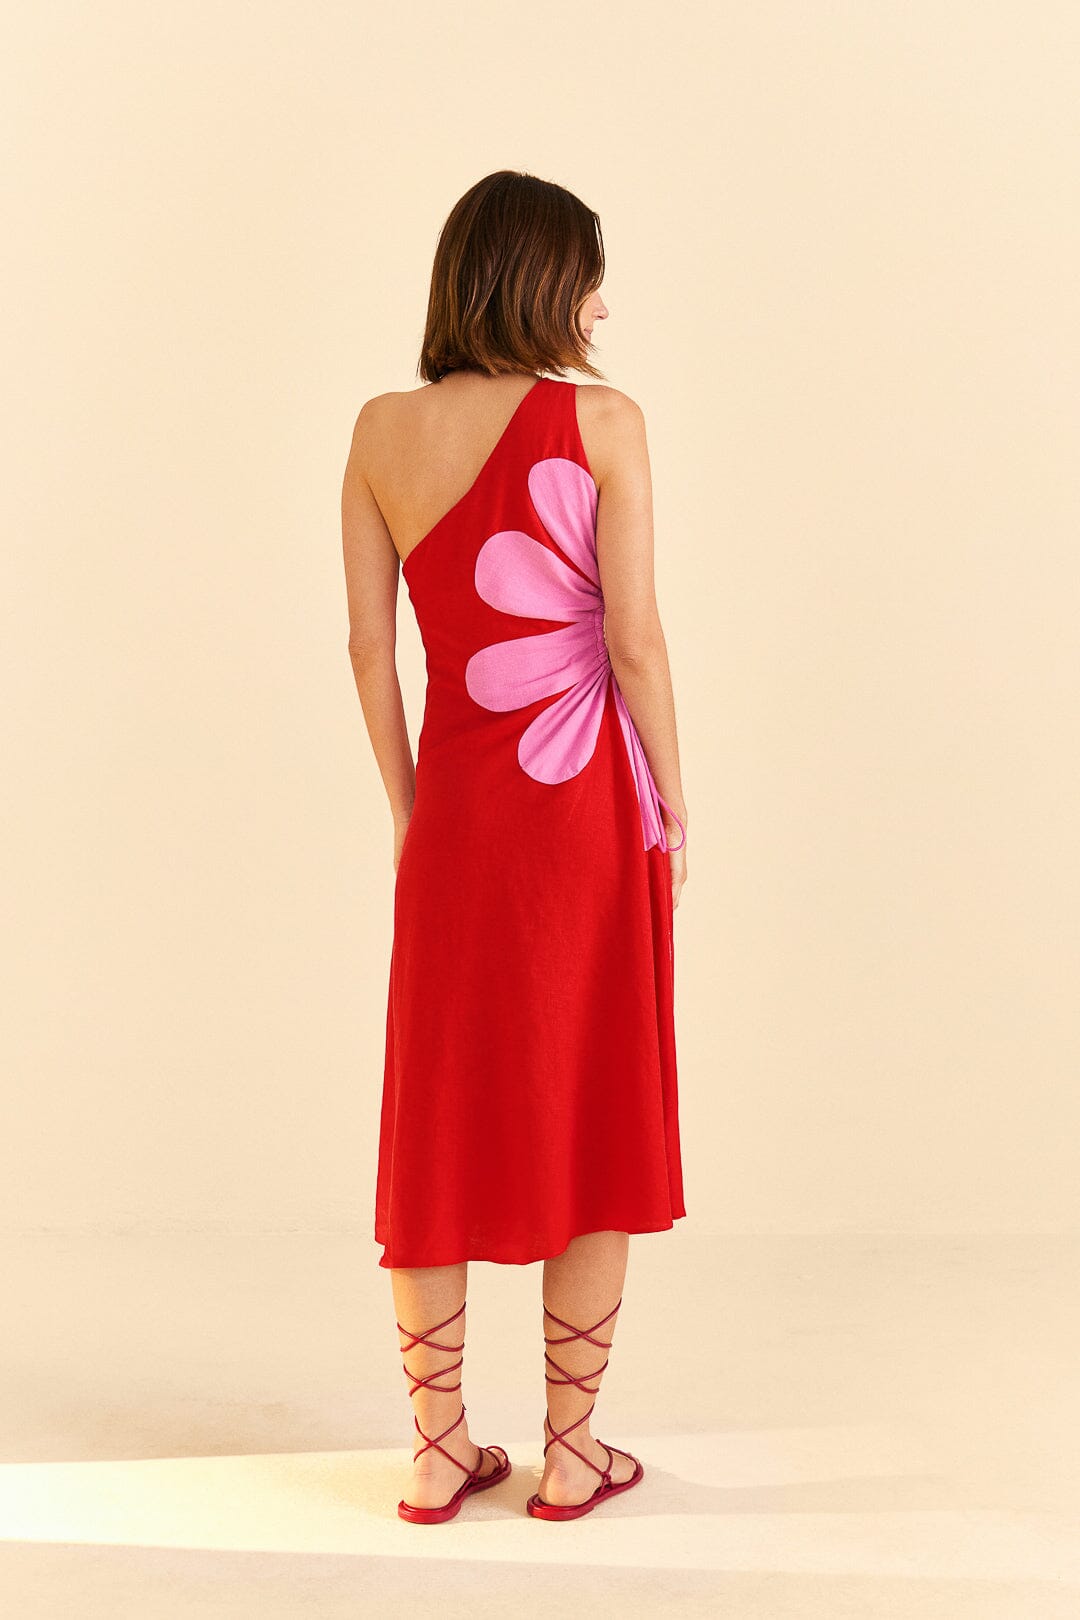 Red Cut-Out Flower Dress